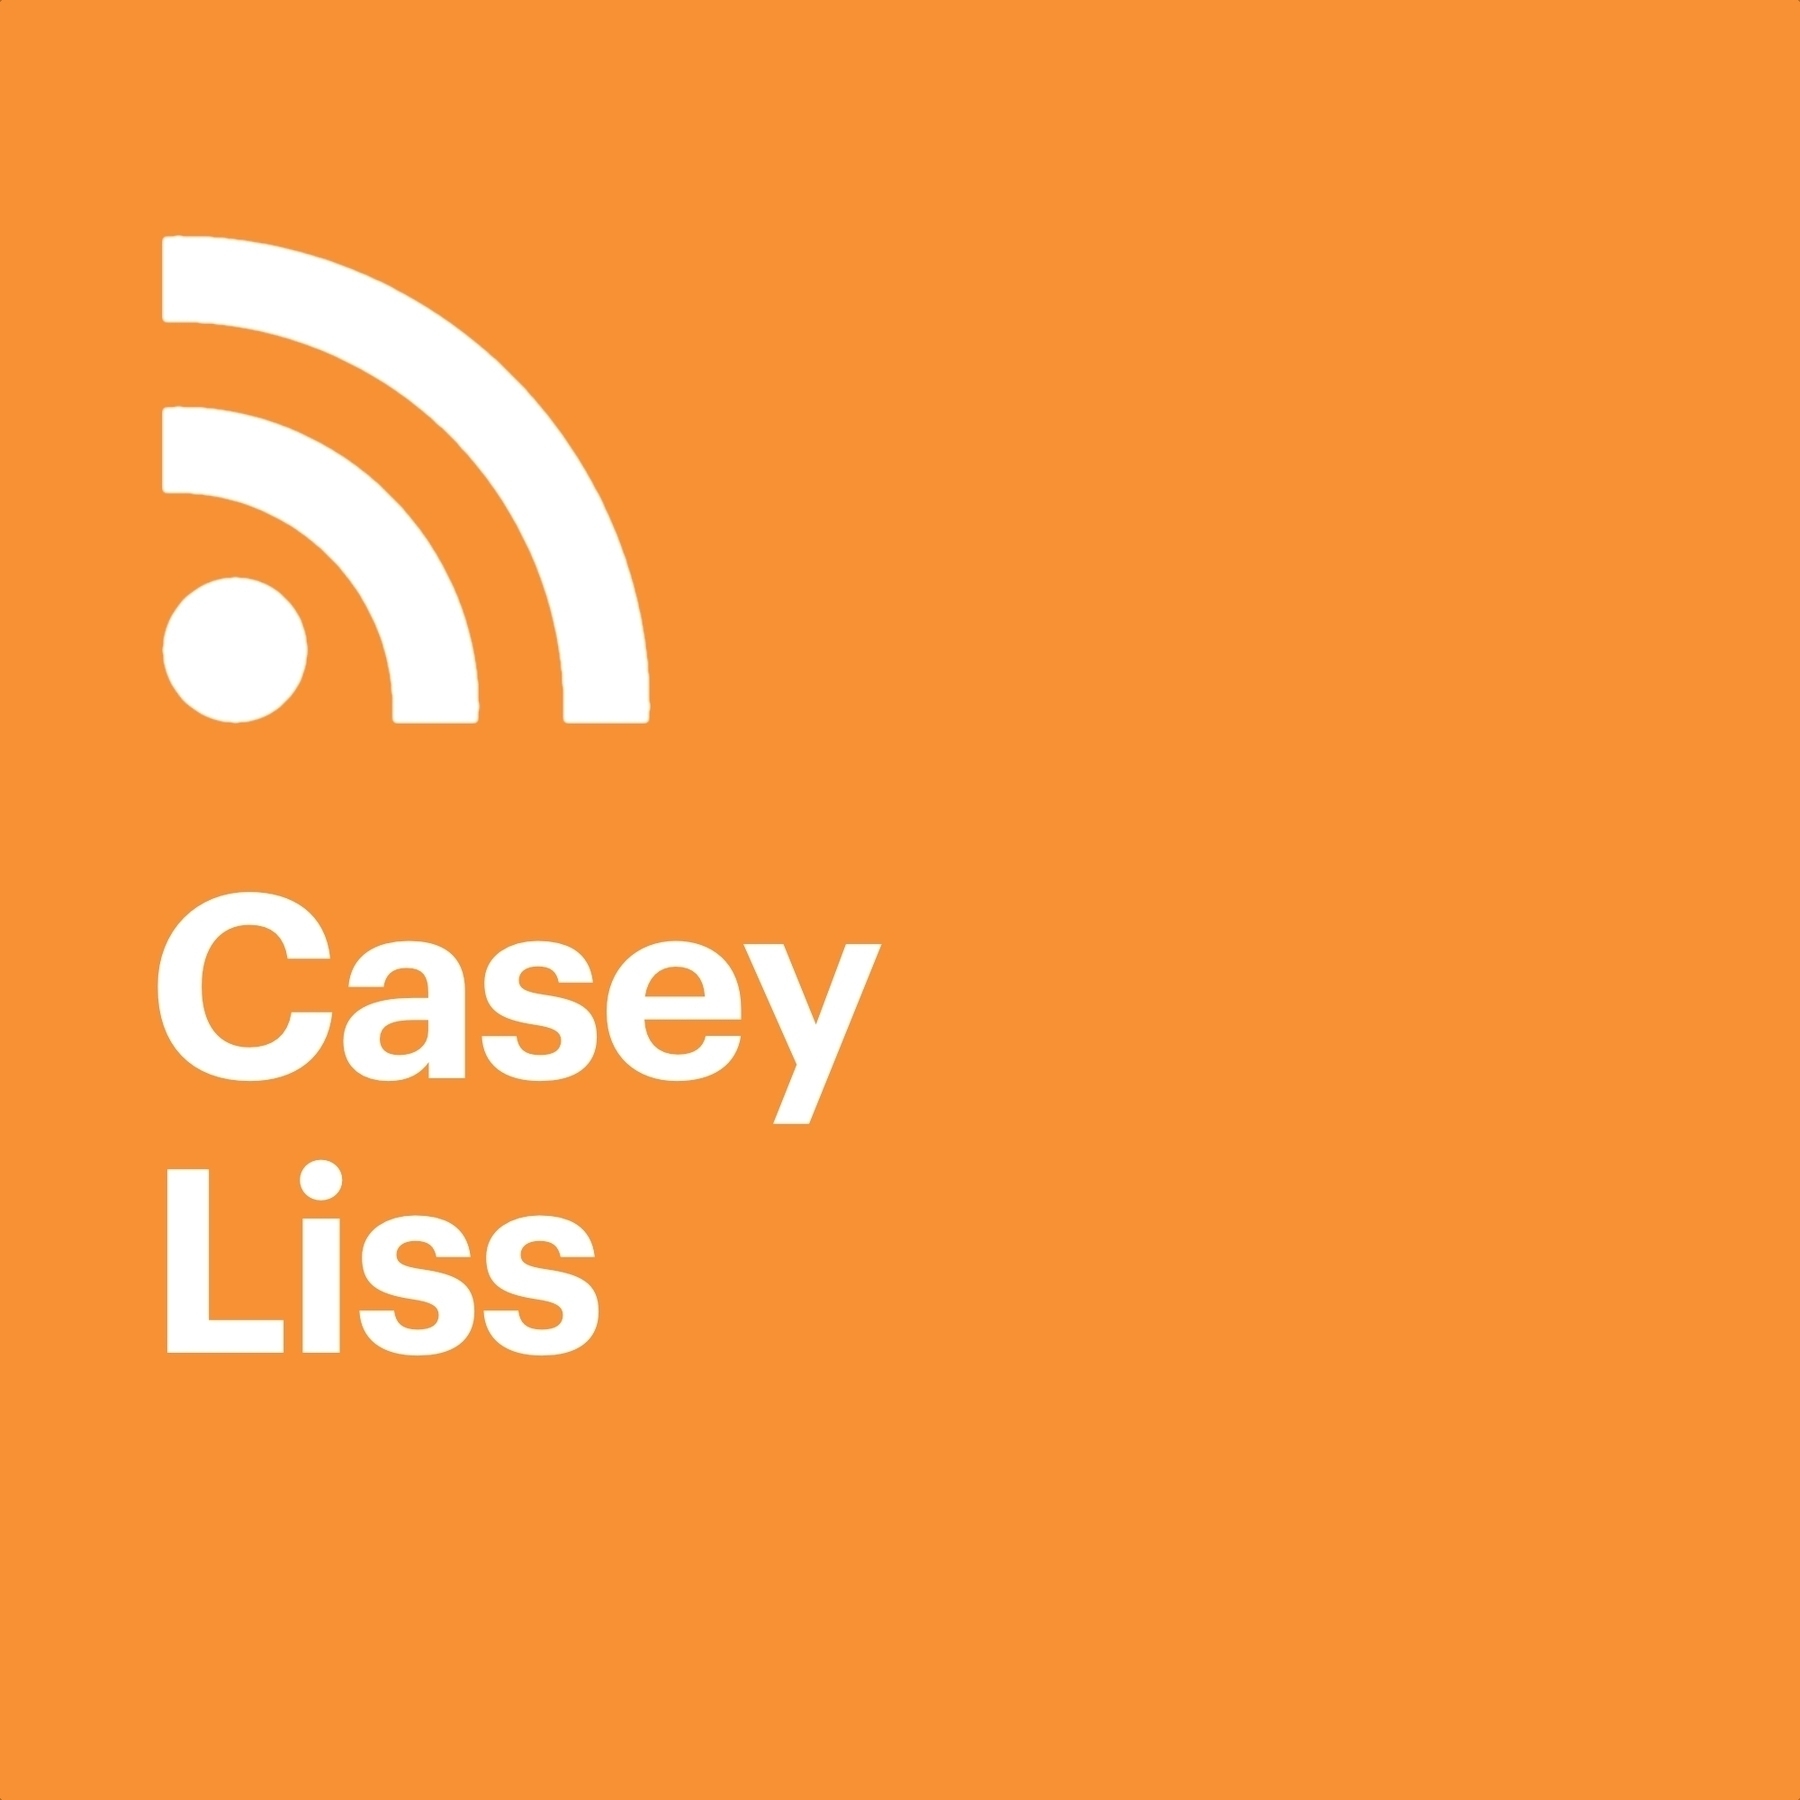 A white RSS icon above the name Casey Liss, both on top of an orange background